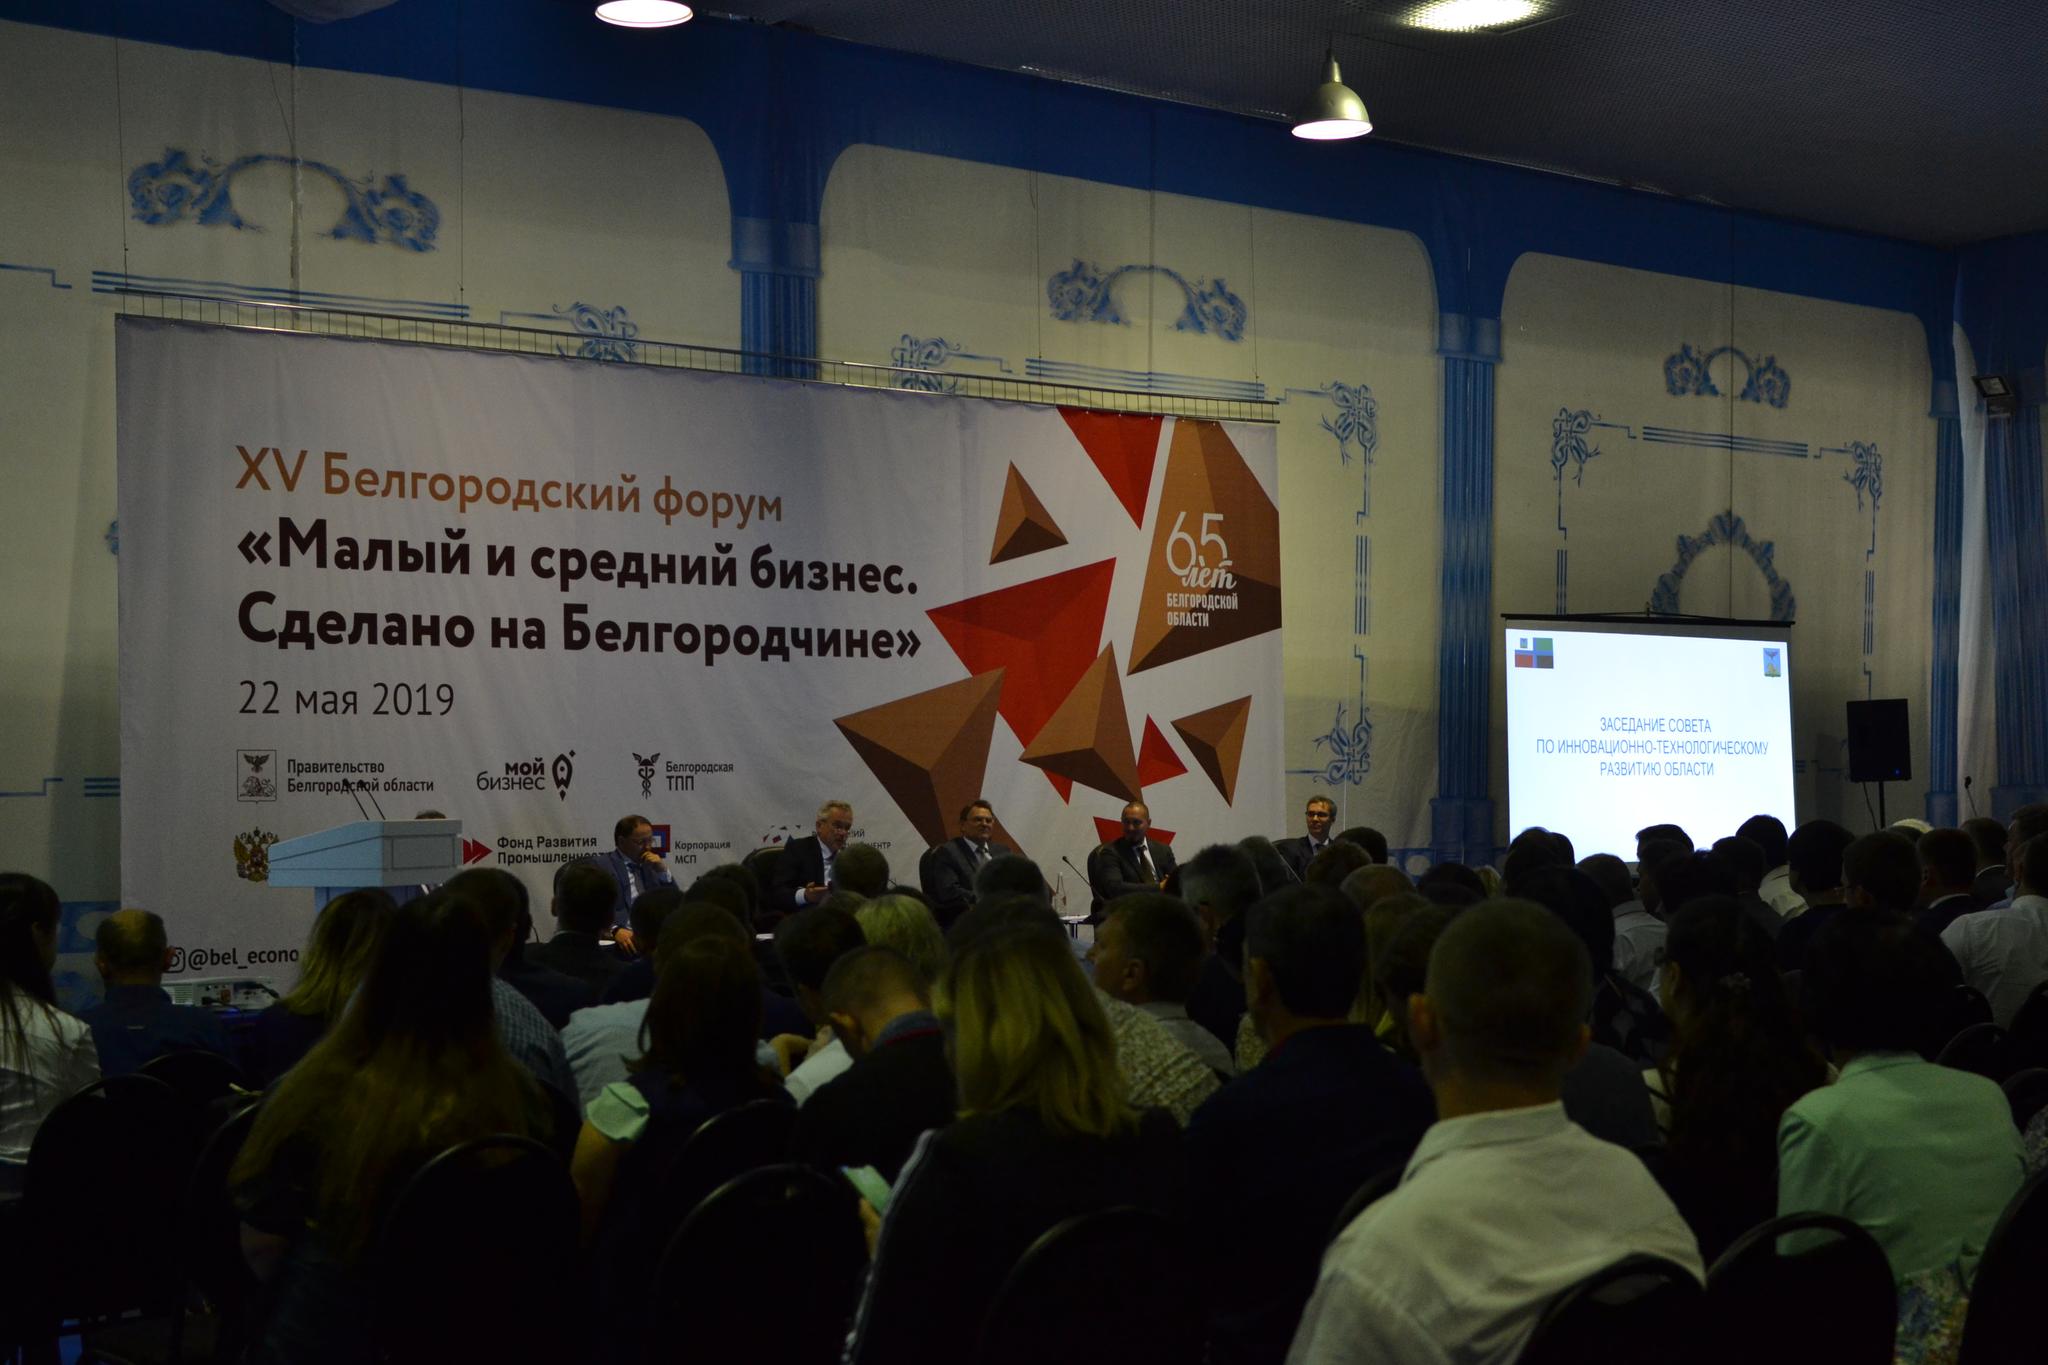 TH Group took part in the 15th Belgorod Forum and Exhibition titled Small and Medium-Sized Enterprises. Made in Belgorod